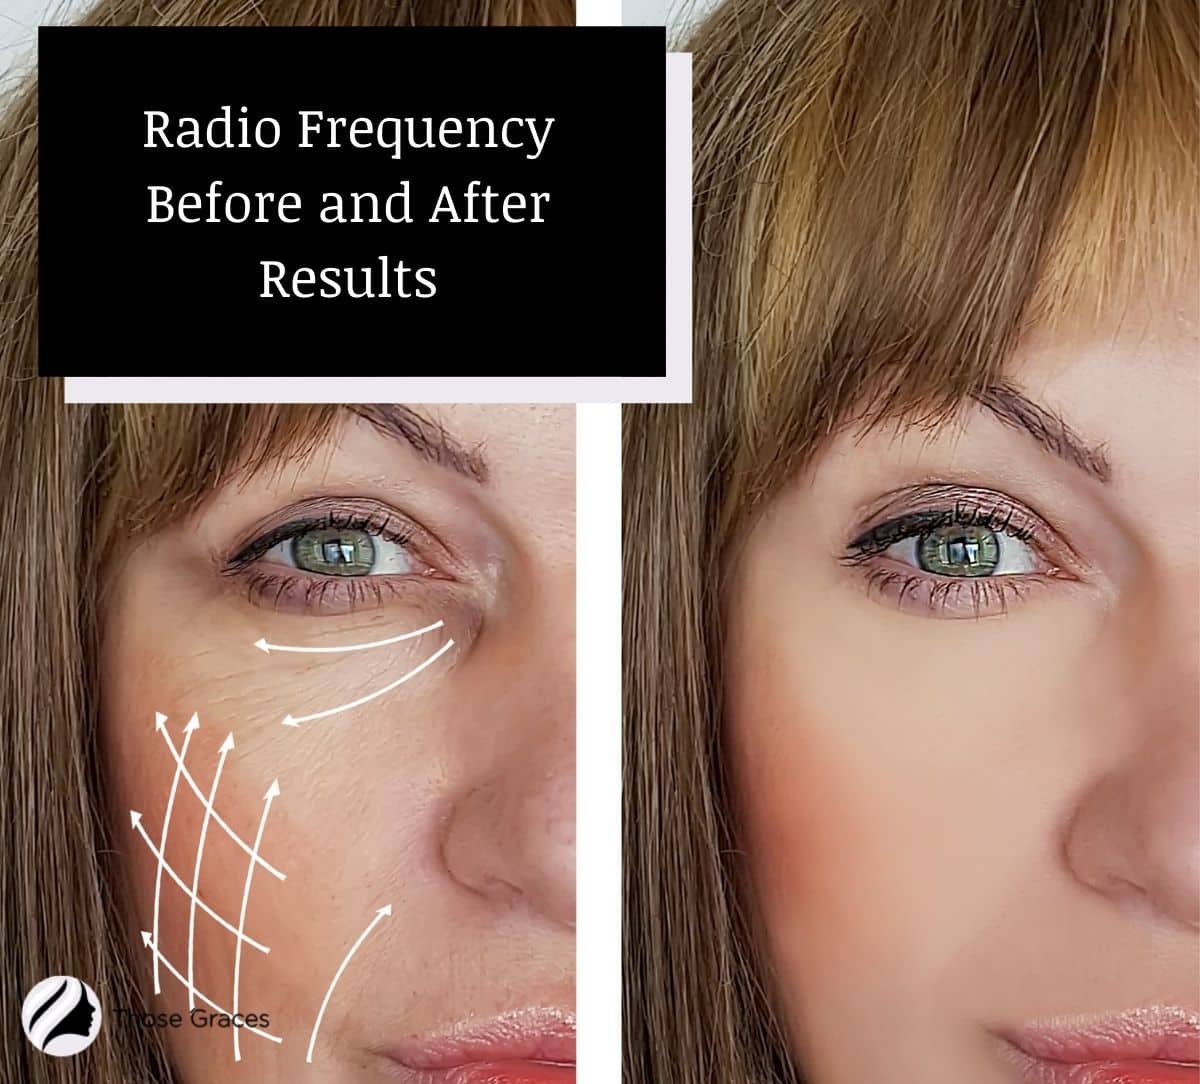 Radio Frequency Before and After results photo